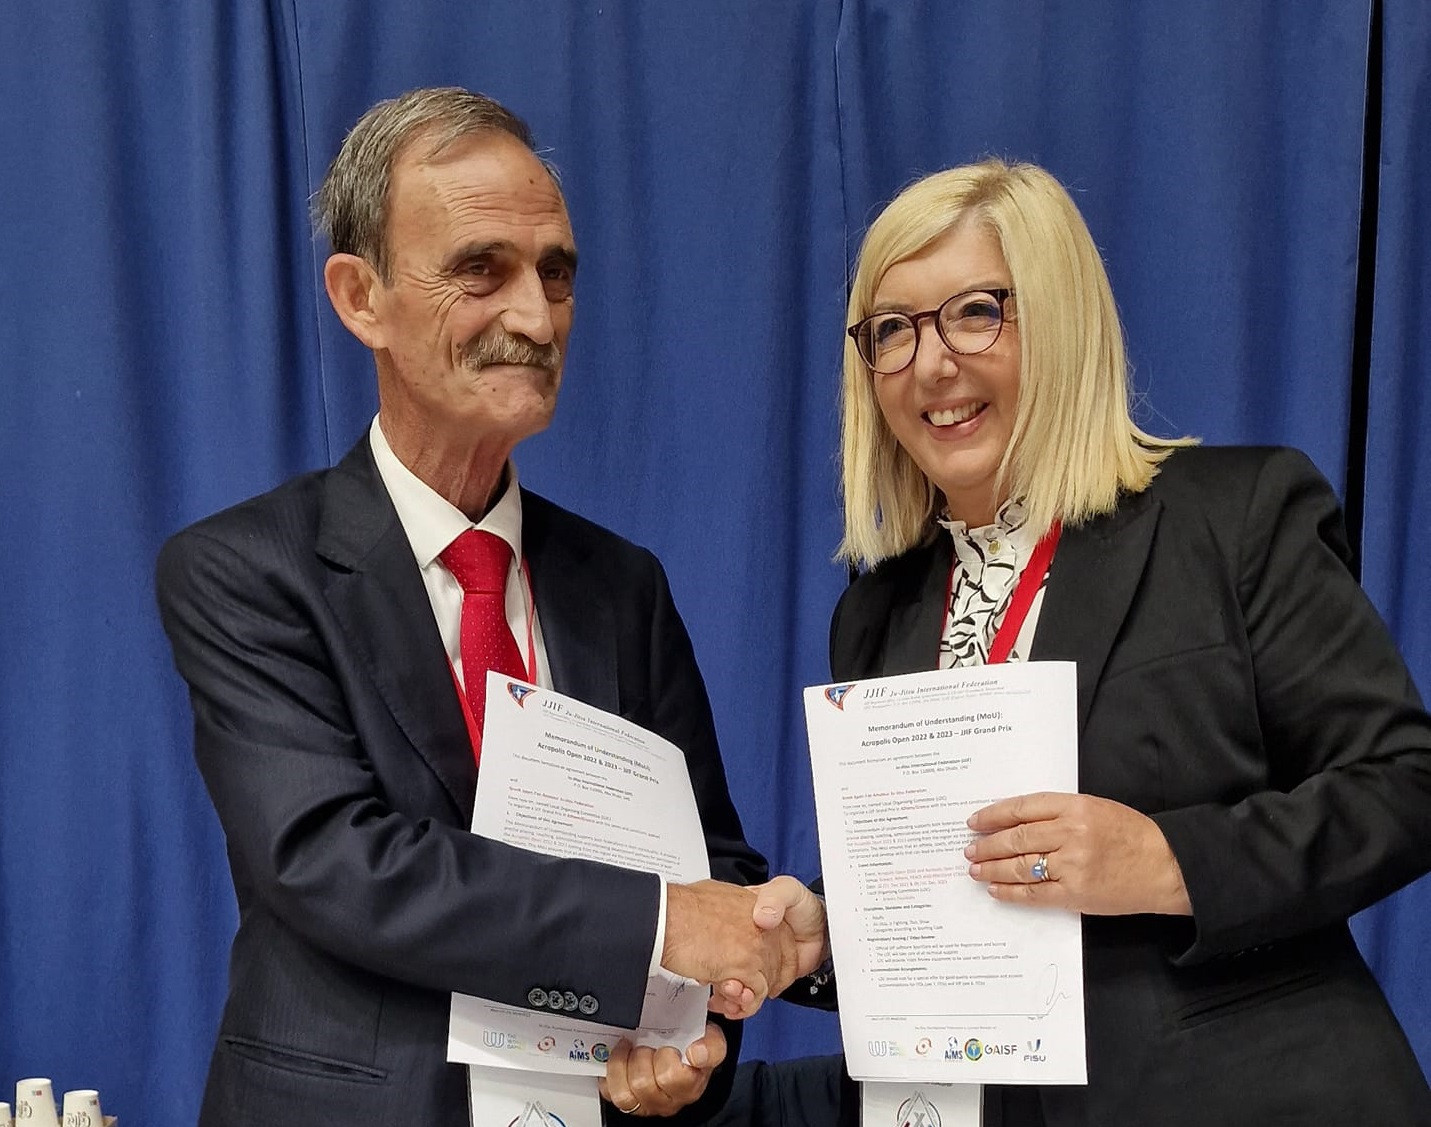 Panagiotis Theodoropoulos, left, signed an agreement with Mary Haritopoulou ©JJIF